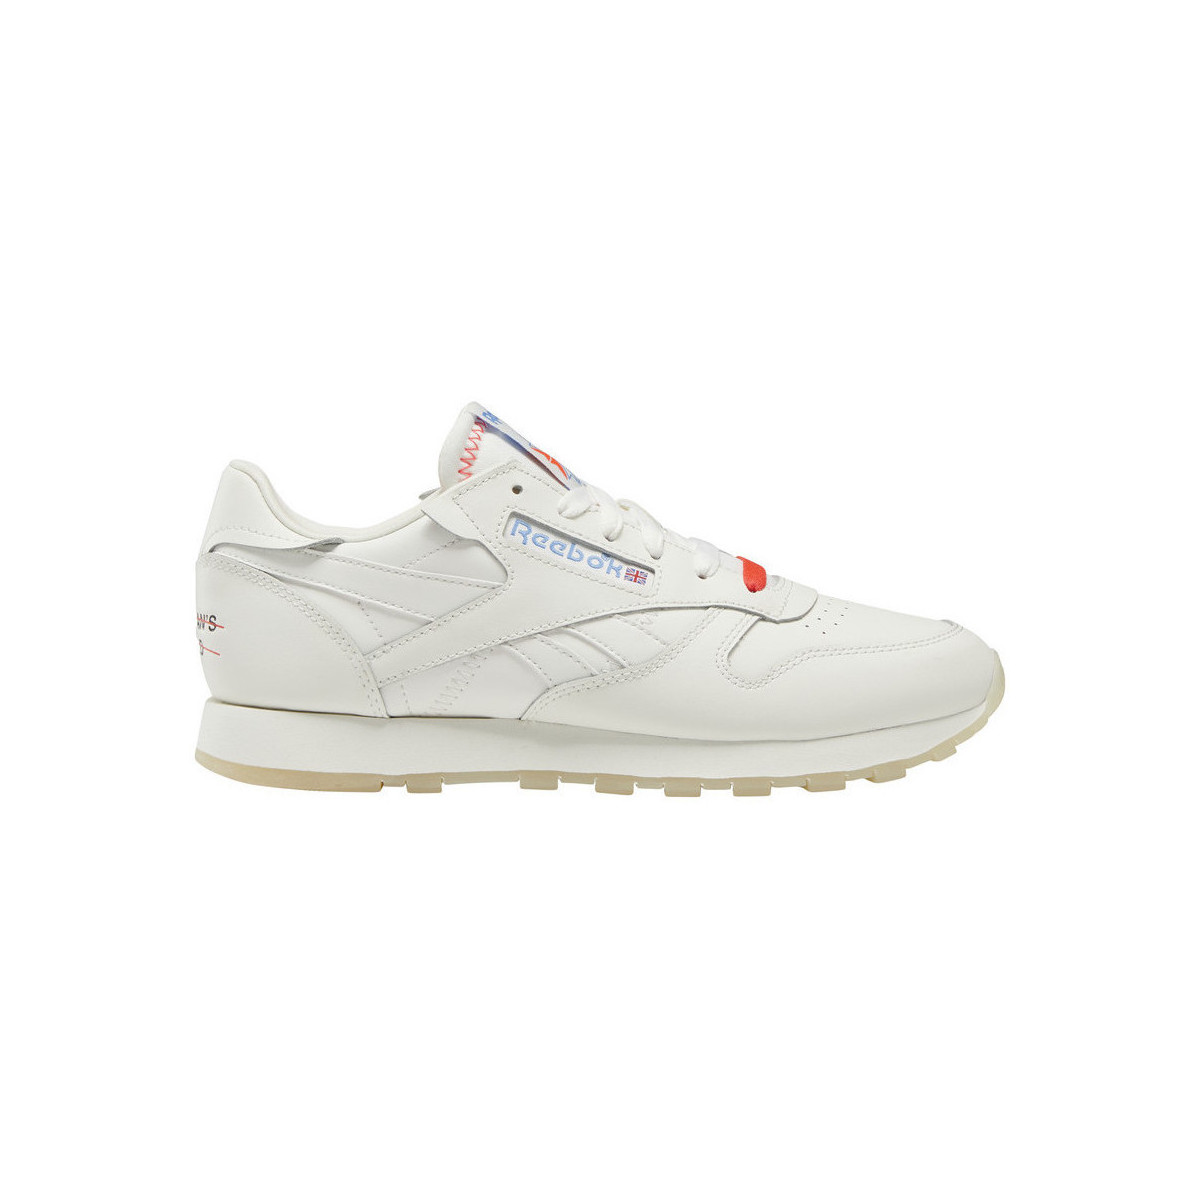 Chaussures Femme Baskets basses Reebok Sport CLASSIC LEATHER Blanc